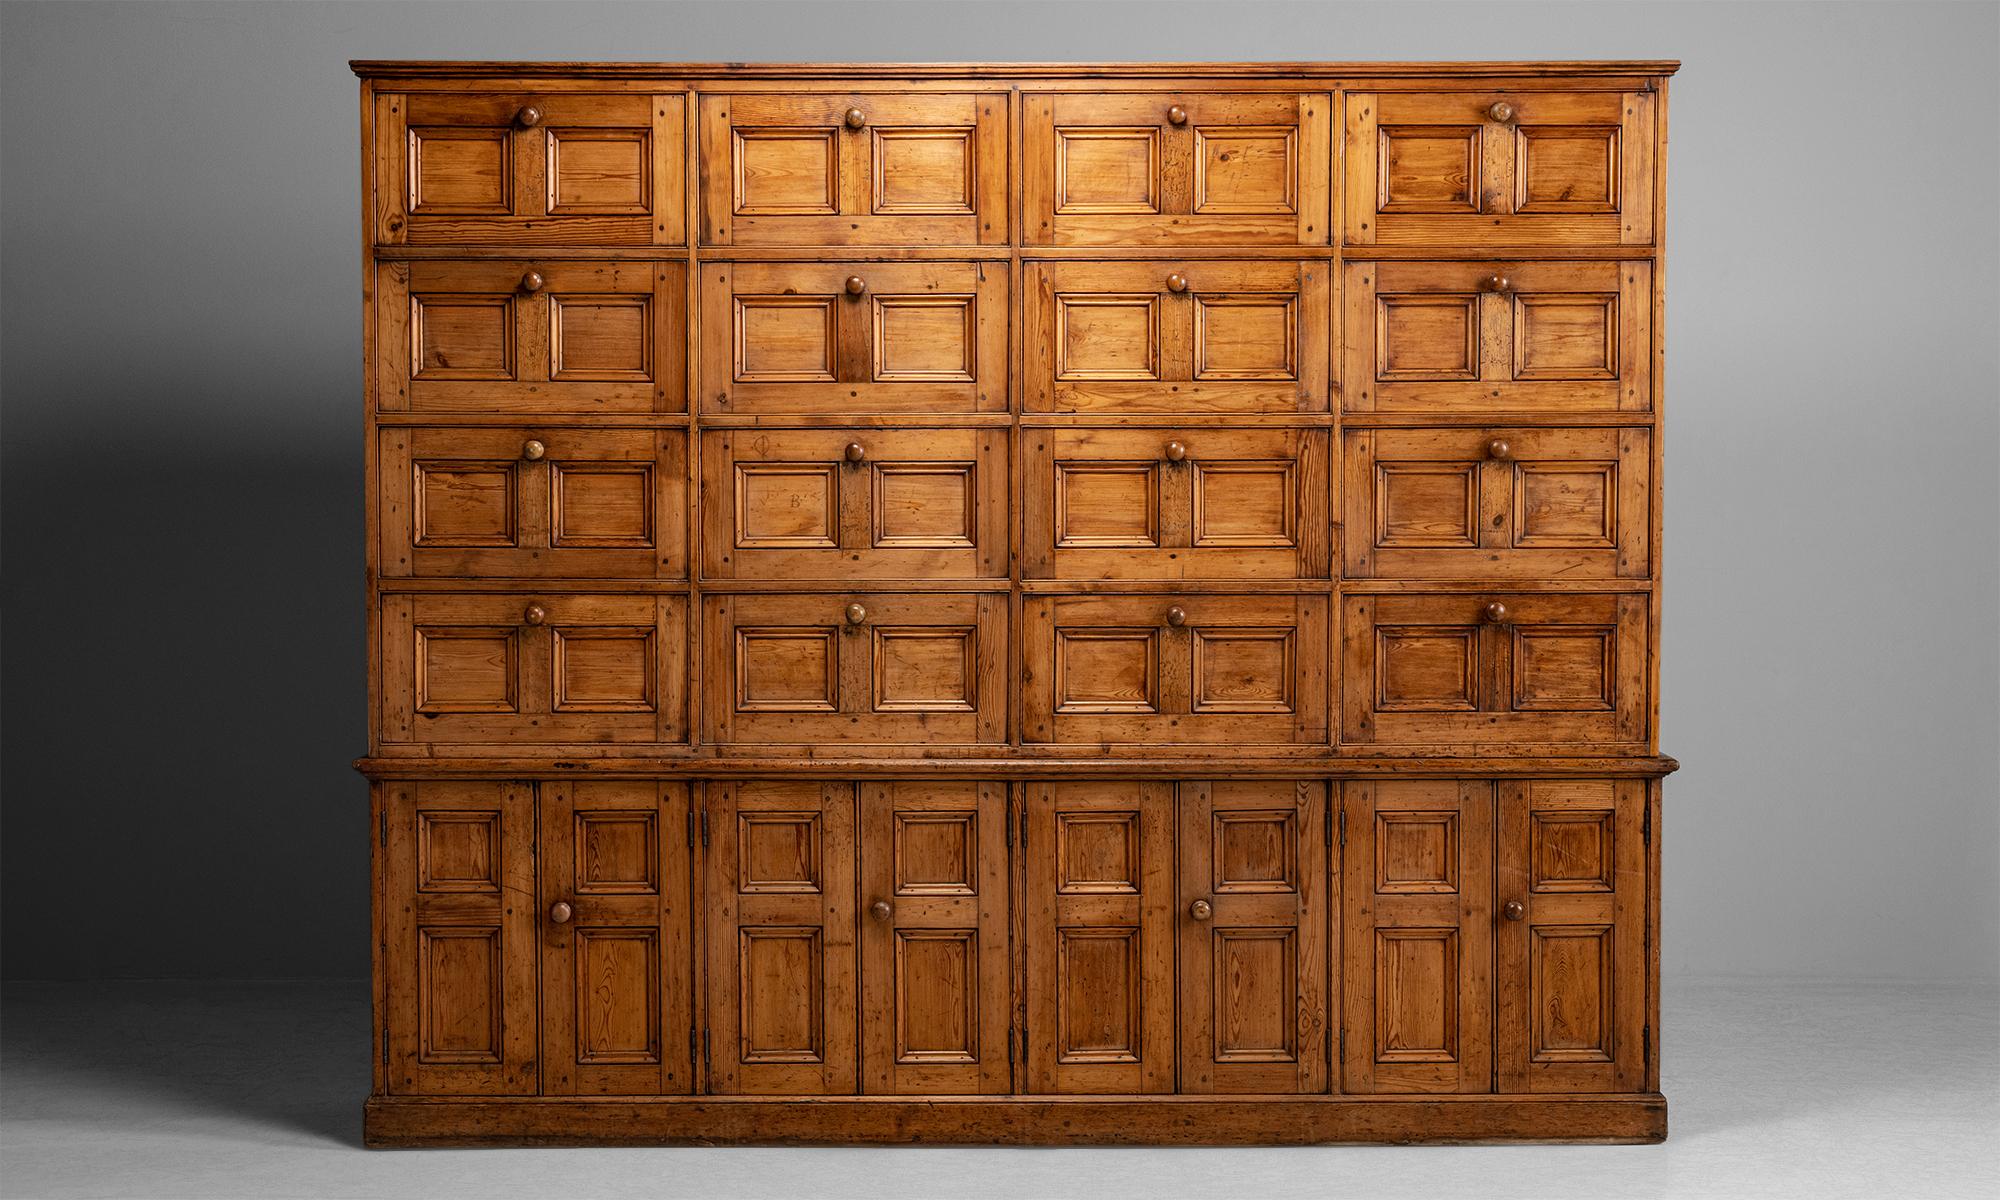 Pine estate cupboard

England circa 1870

Extremely well made cabinet with 16 folding doors on top and doors.